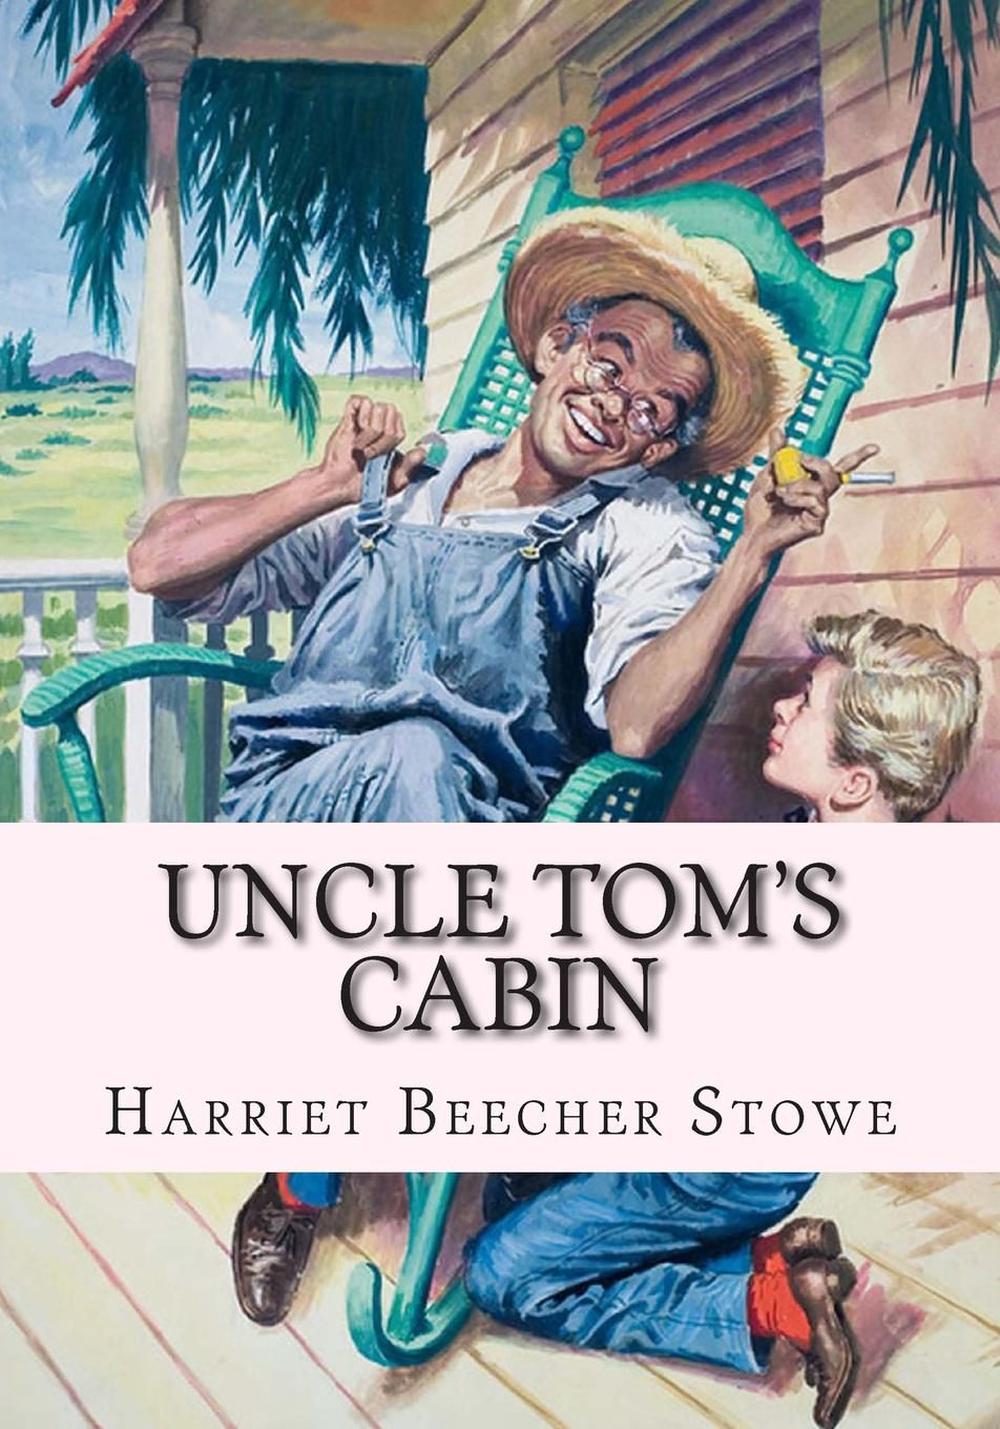 Uncle Tom's Cabin by Harriet Beecher Stowe (English) Paperback Book